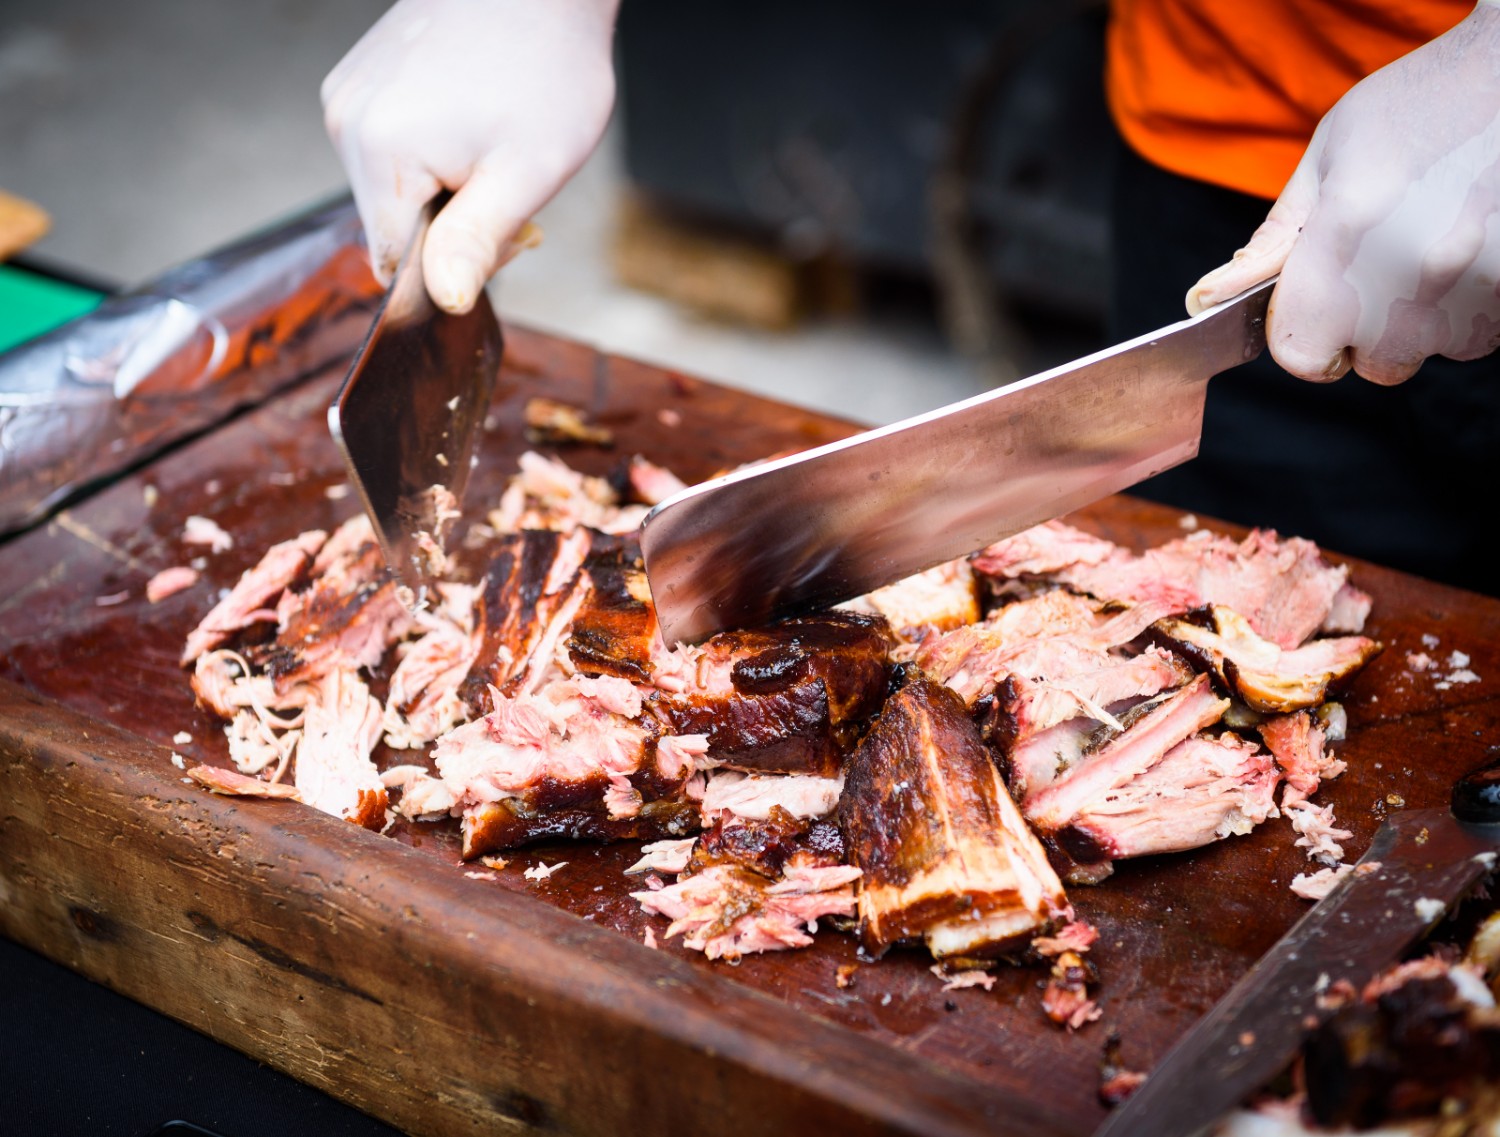 town of Frisco BBQ challenge charming main street setting food event